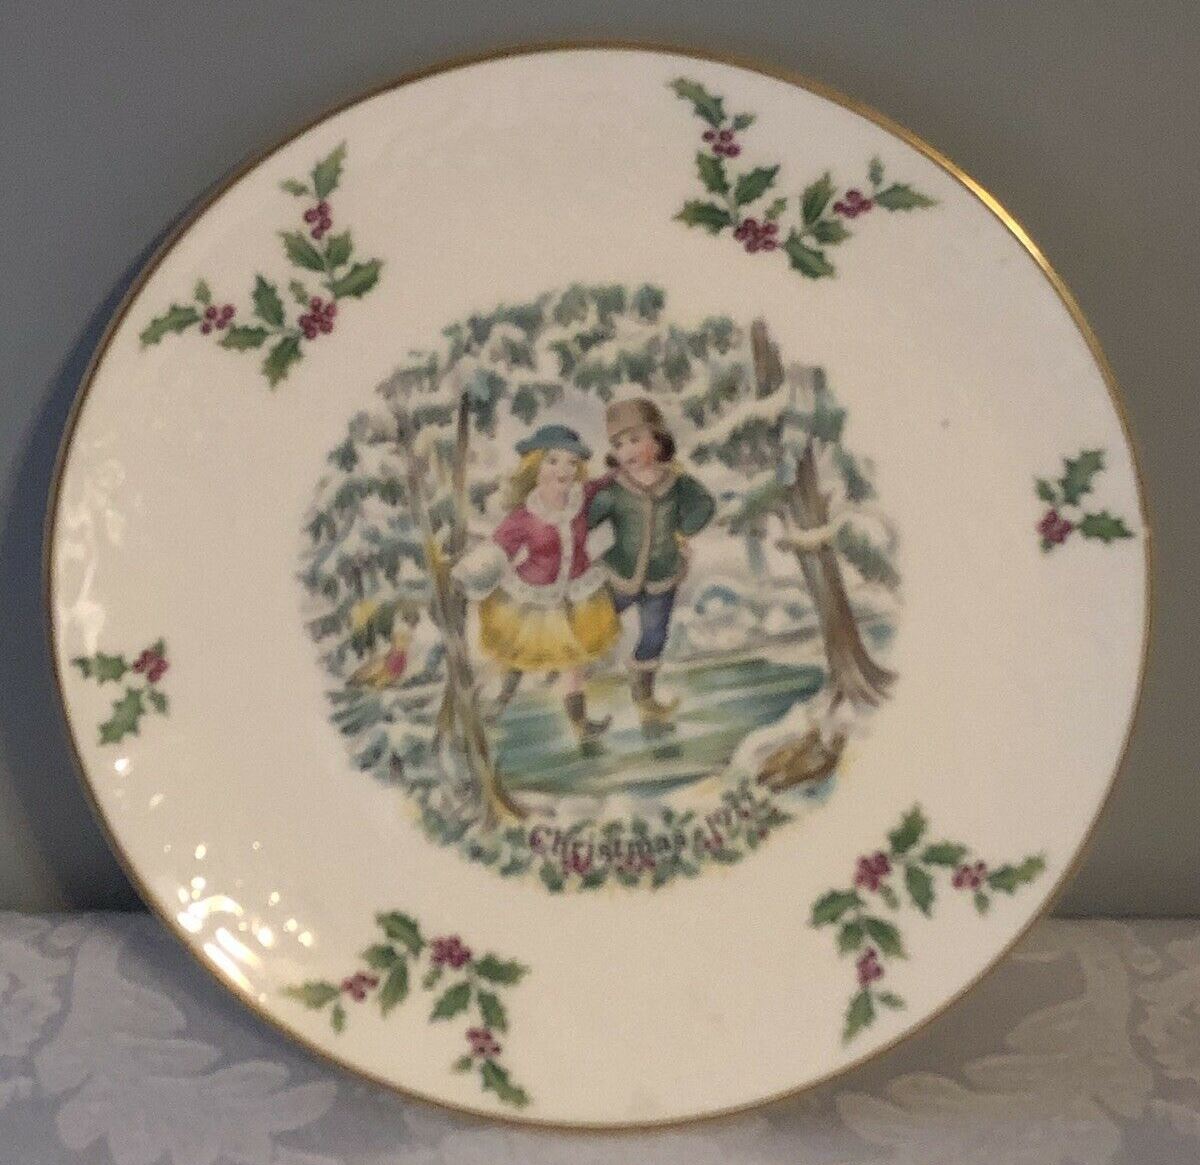 Primary image for Royal Doulton "Merry Christmas"  Plate 1977